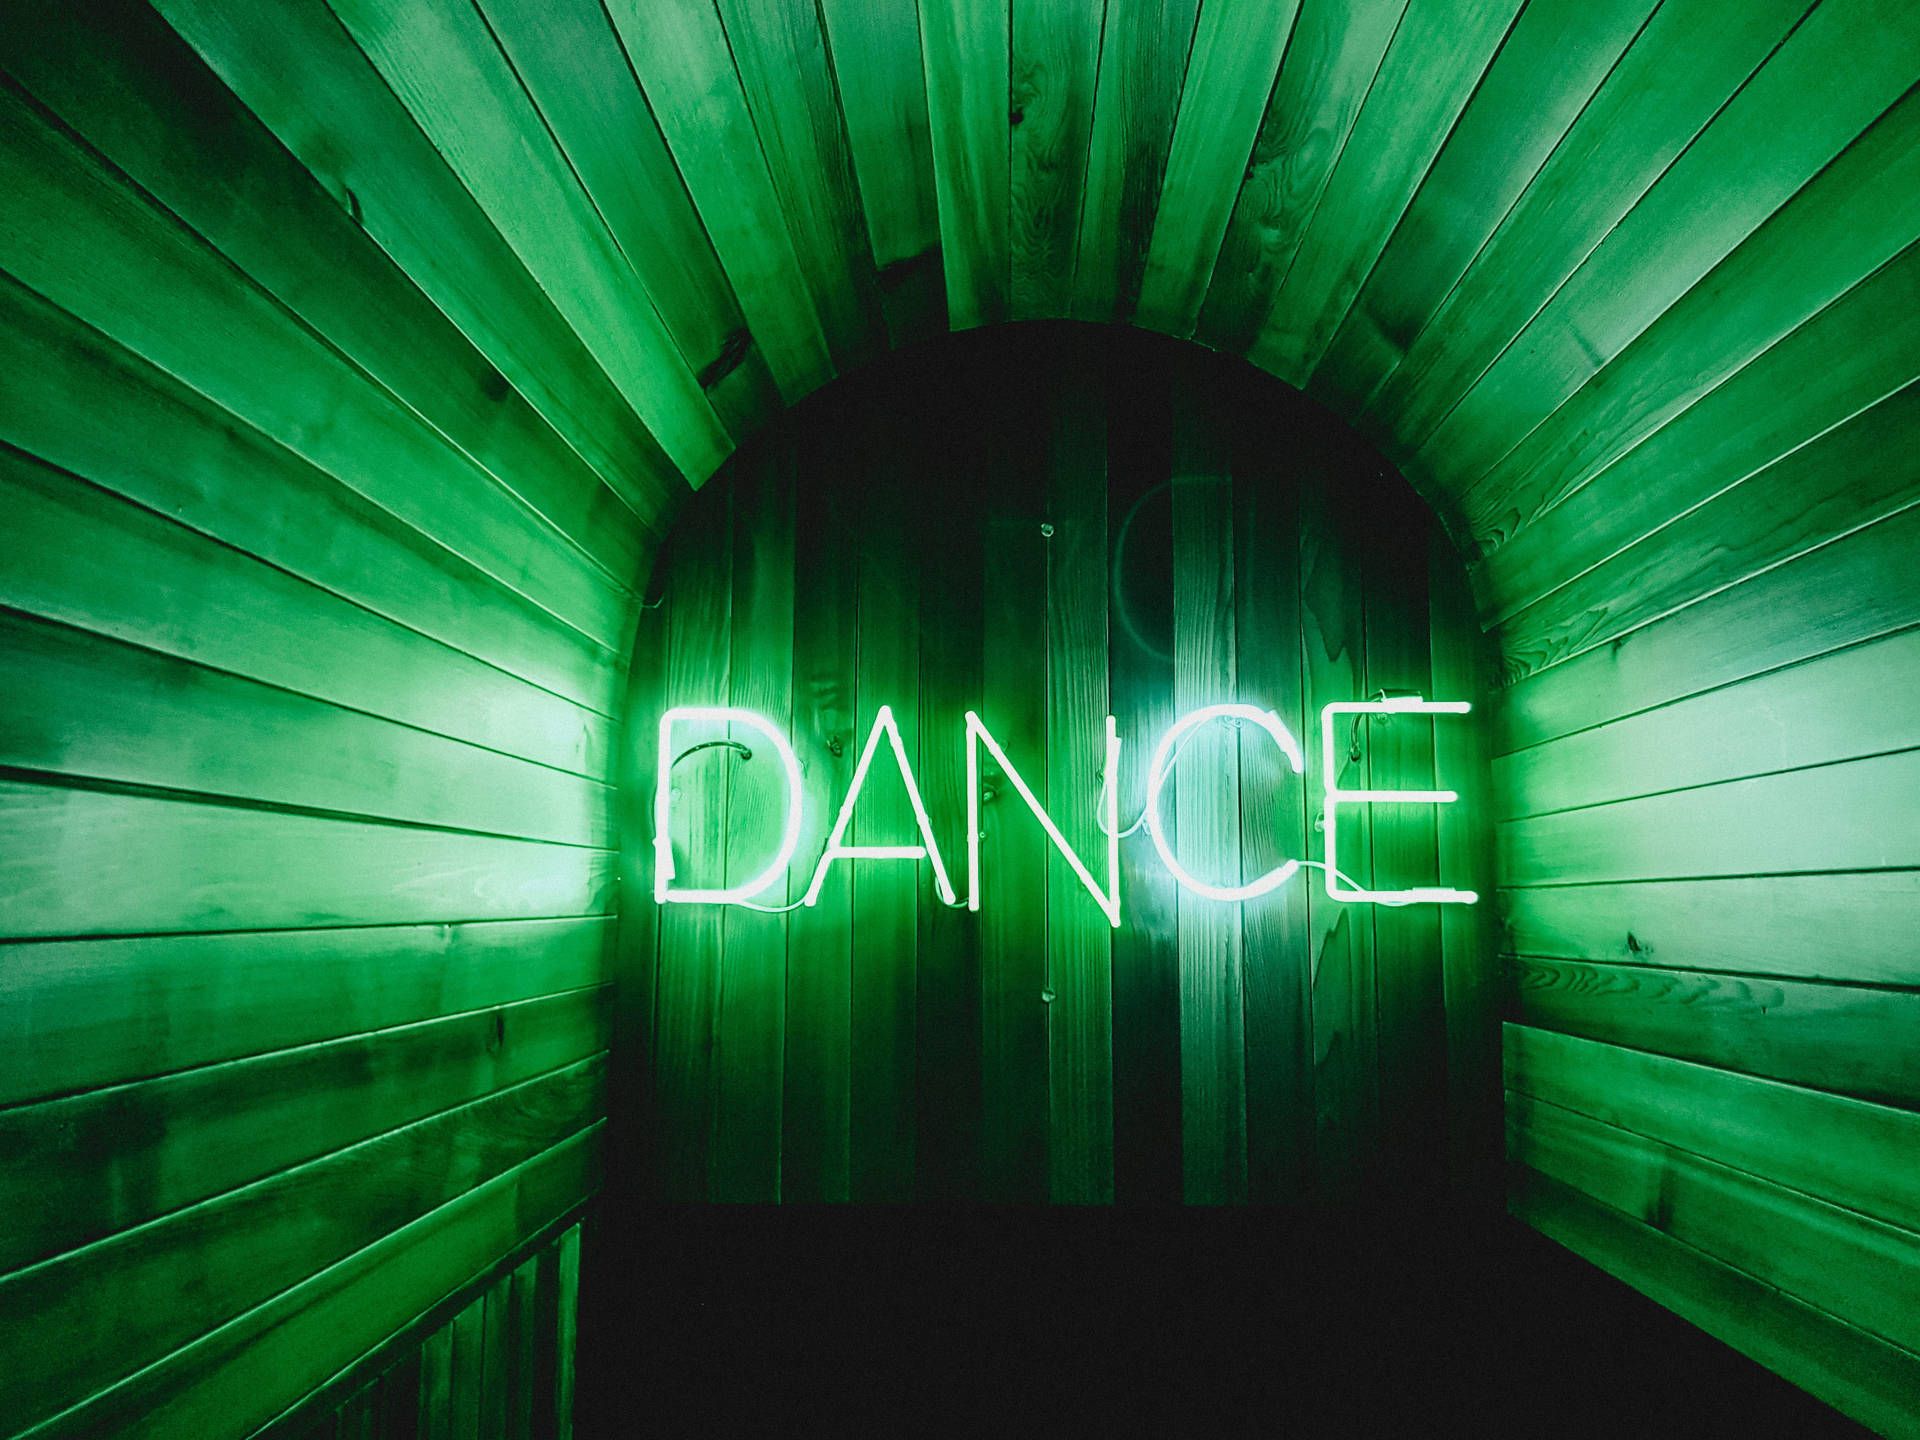 A neon sign that says dance - Neon green